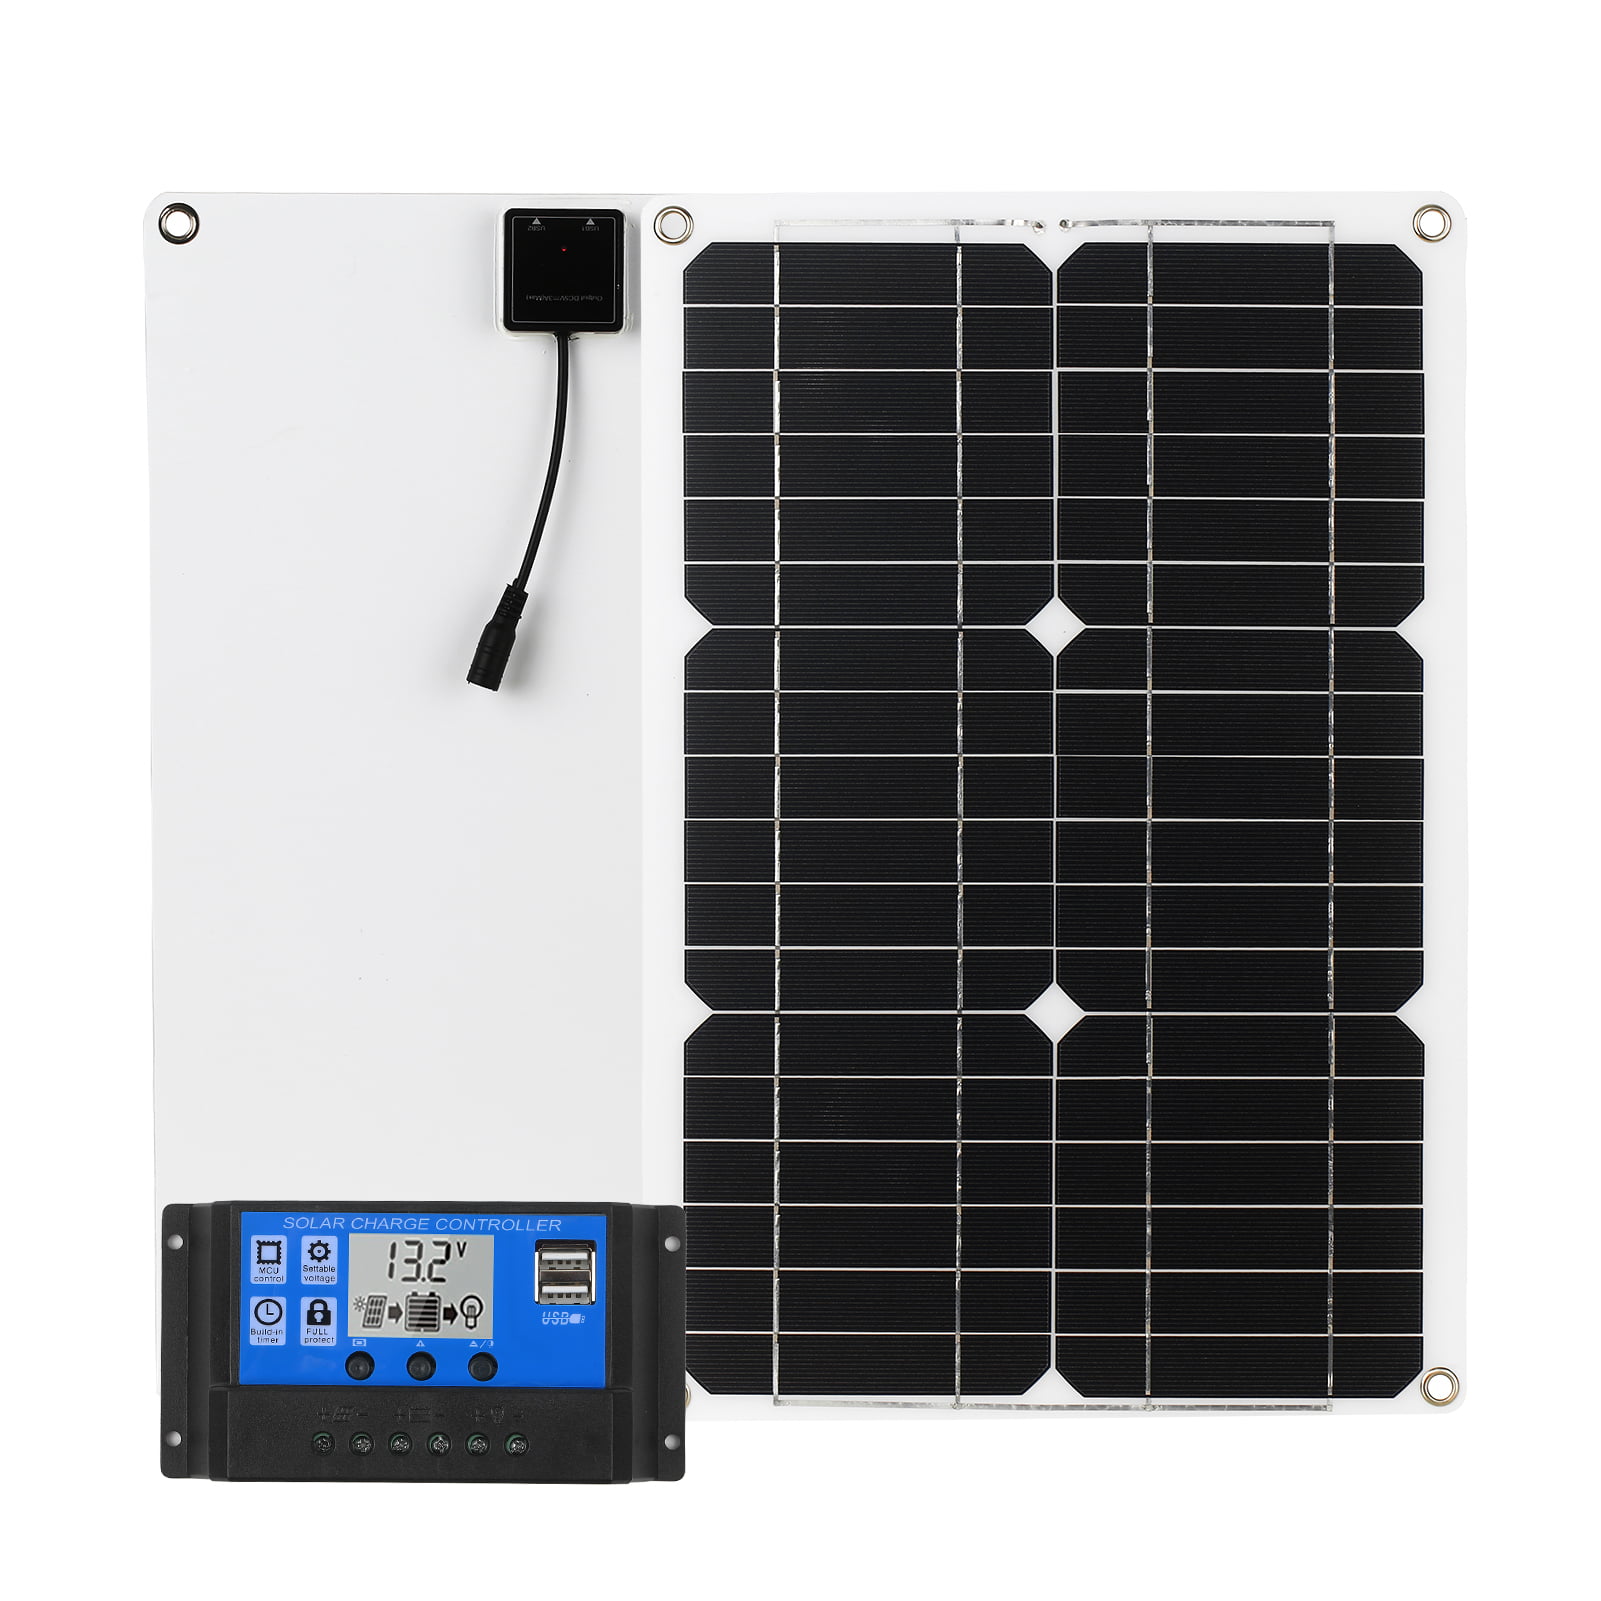 Details about   70W USB Solar Panel Folding Portable Power Charger Camping Travel Phone Charger